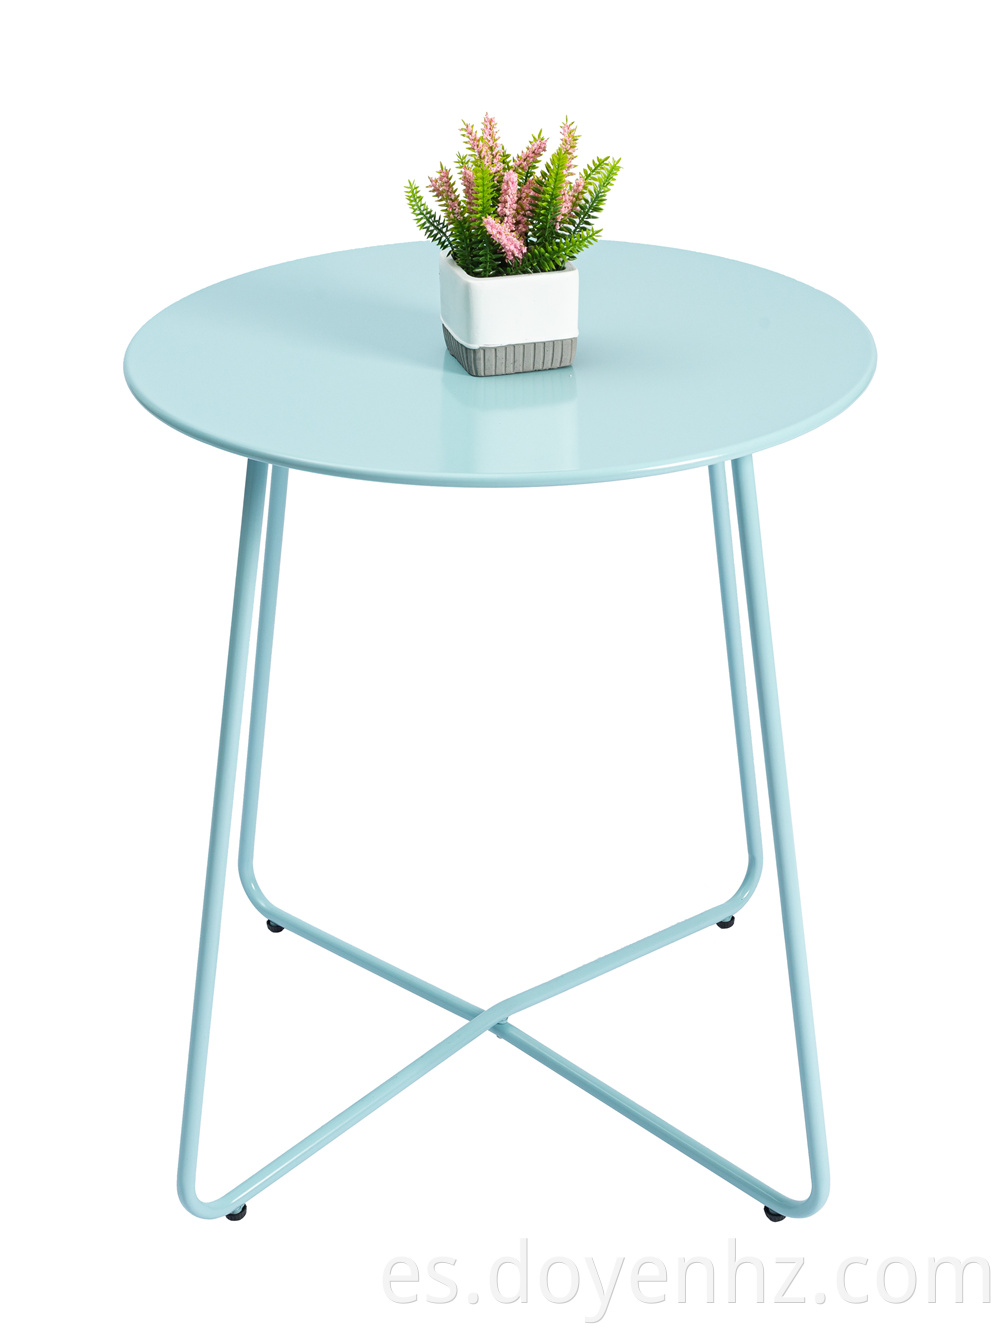 60cm Metal Round Unfoldable Table